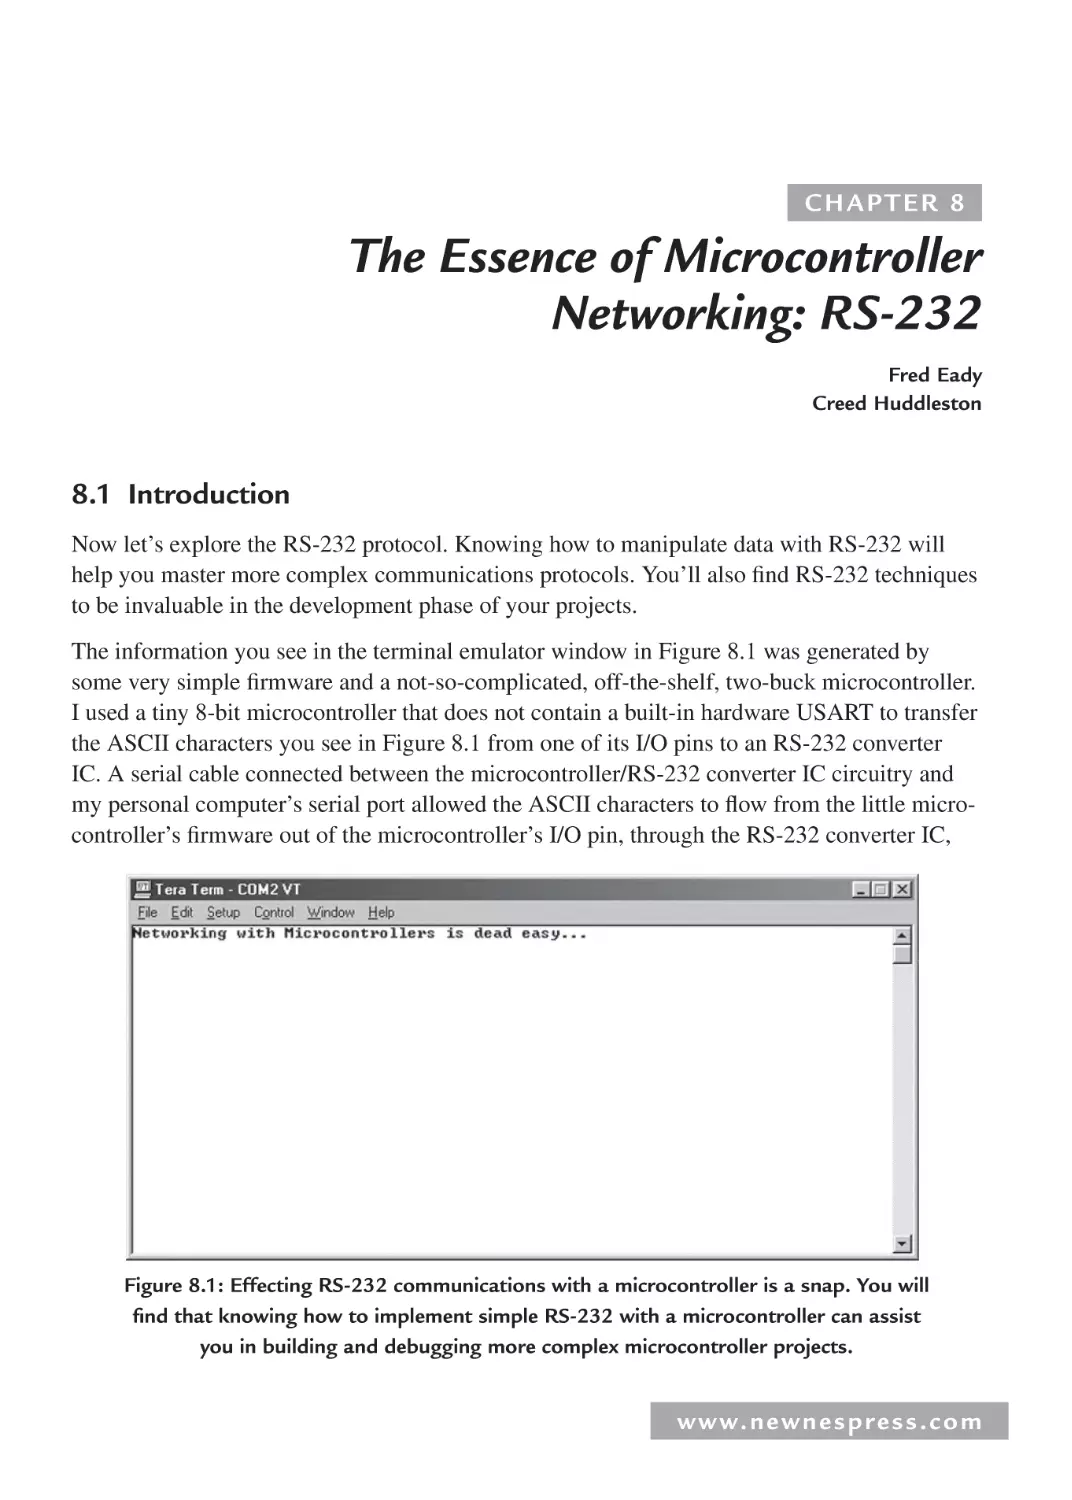 8 The Essence of Microcontroller Networking
8.1 Introduction